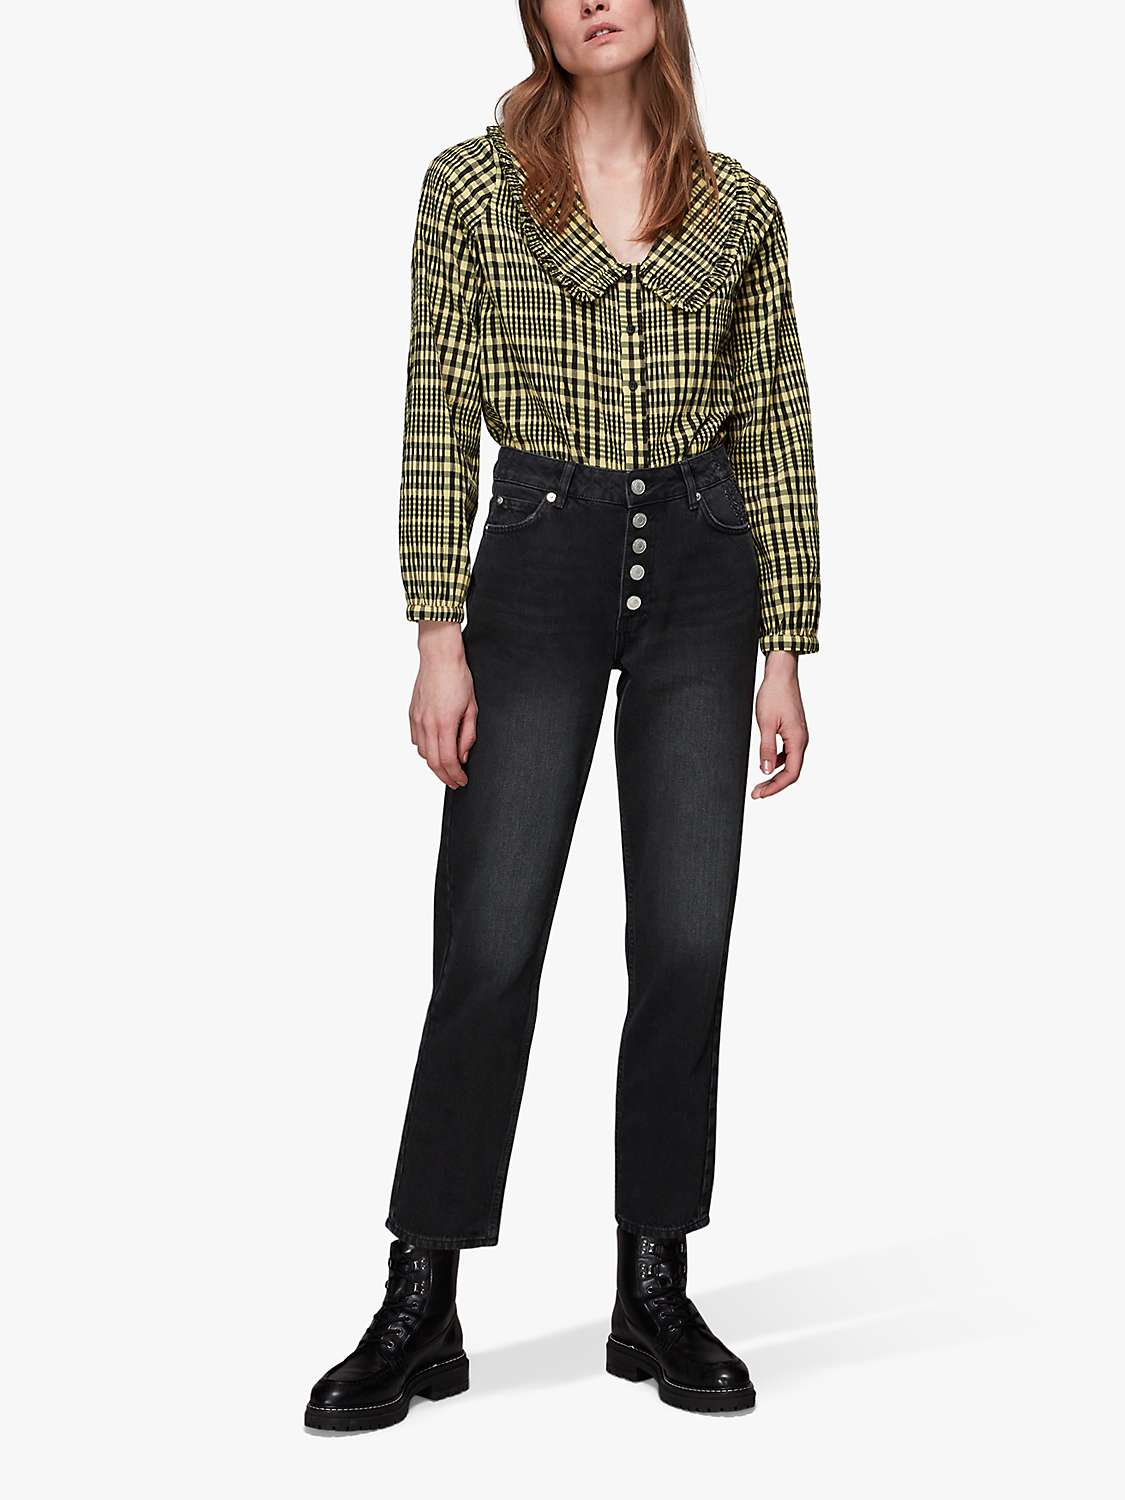 Buy Whistles Petite Authentic Hollie Button Jeans, Black Online at johnlewis.com